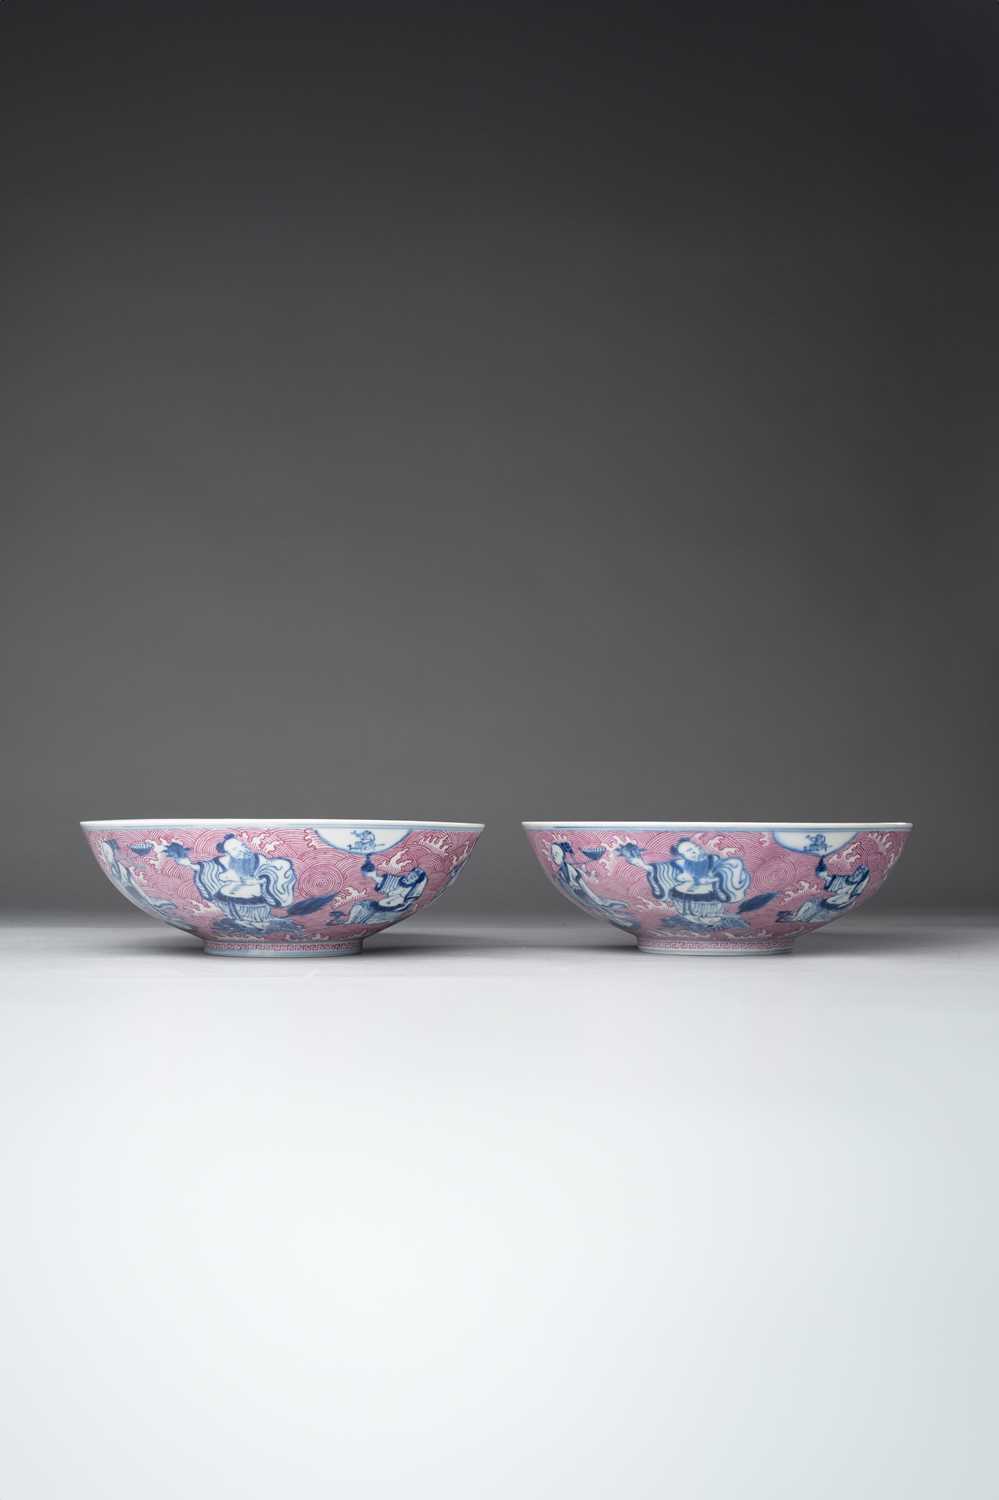 A PAIR OF CHINESE PUCE-ENAMELLED BLUE AND WHITE 'EIGHT IMMORTALS' BOWLS SIX-CHARACTER GUANGXU